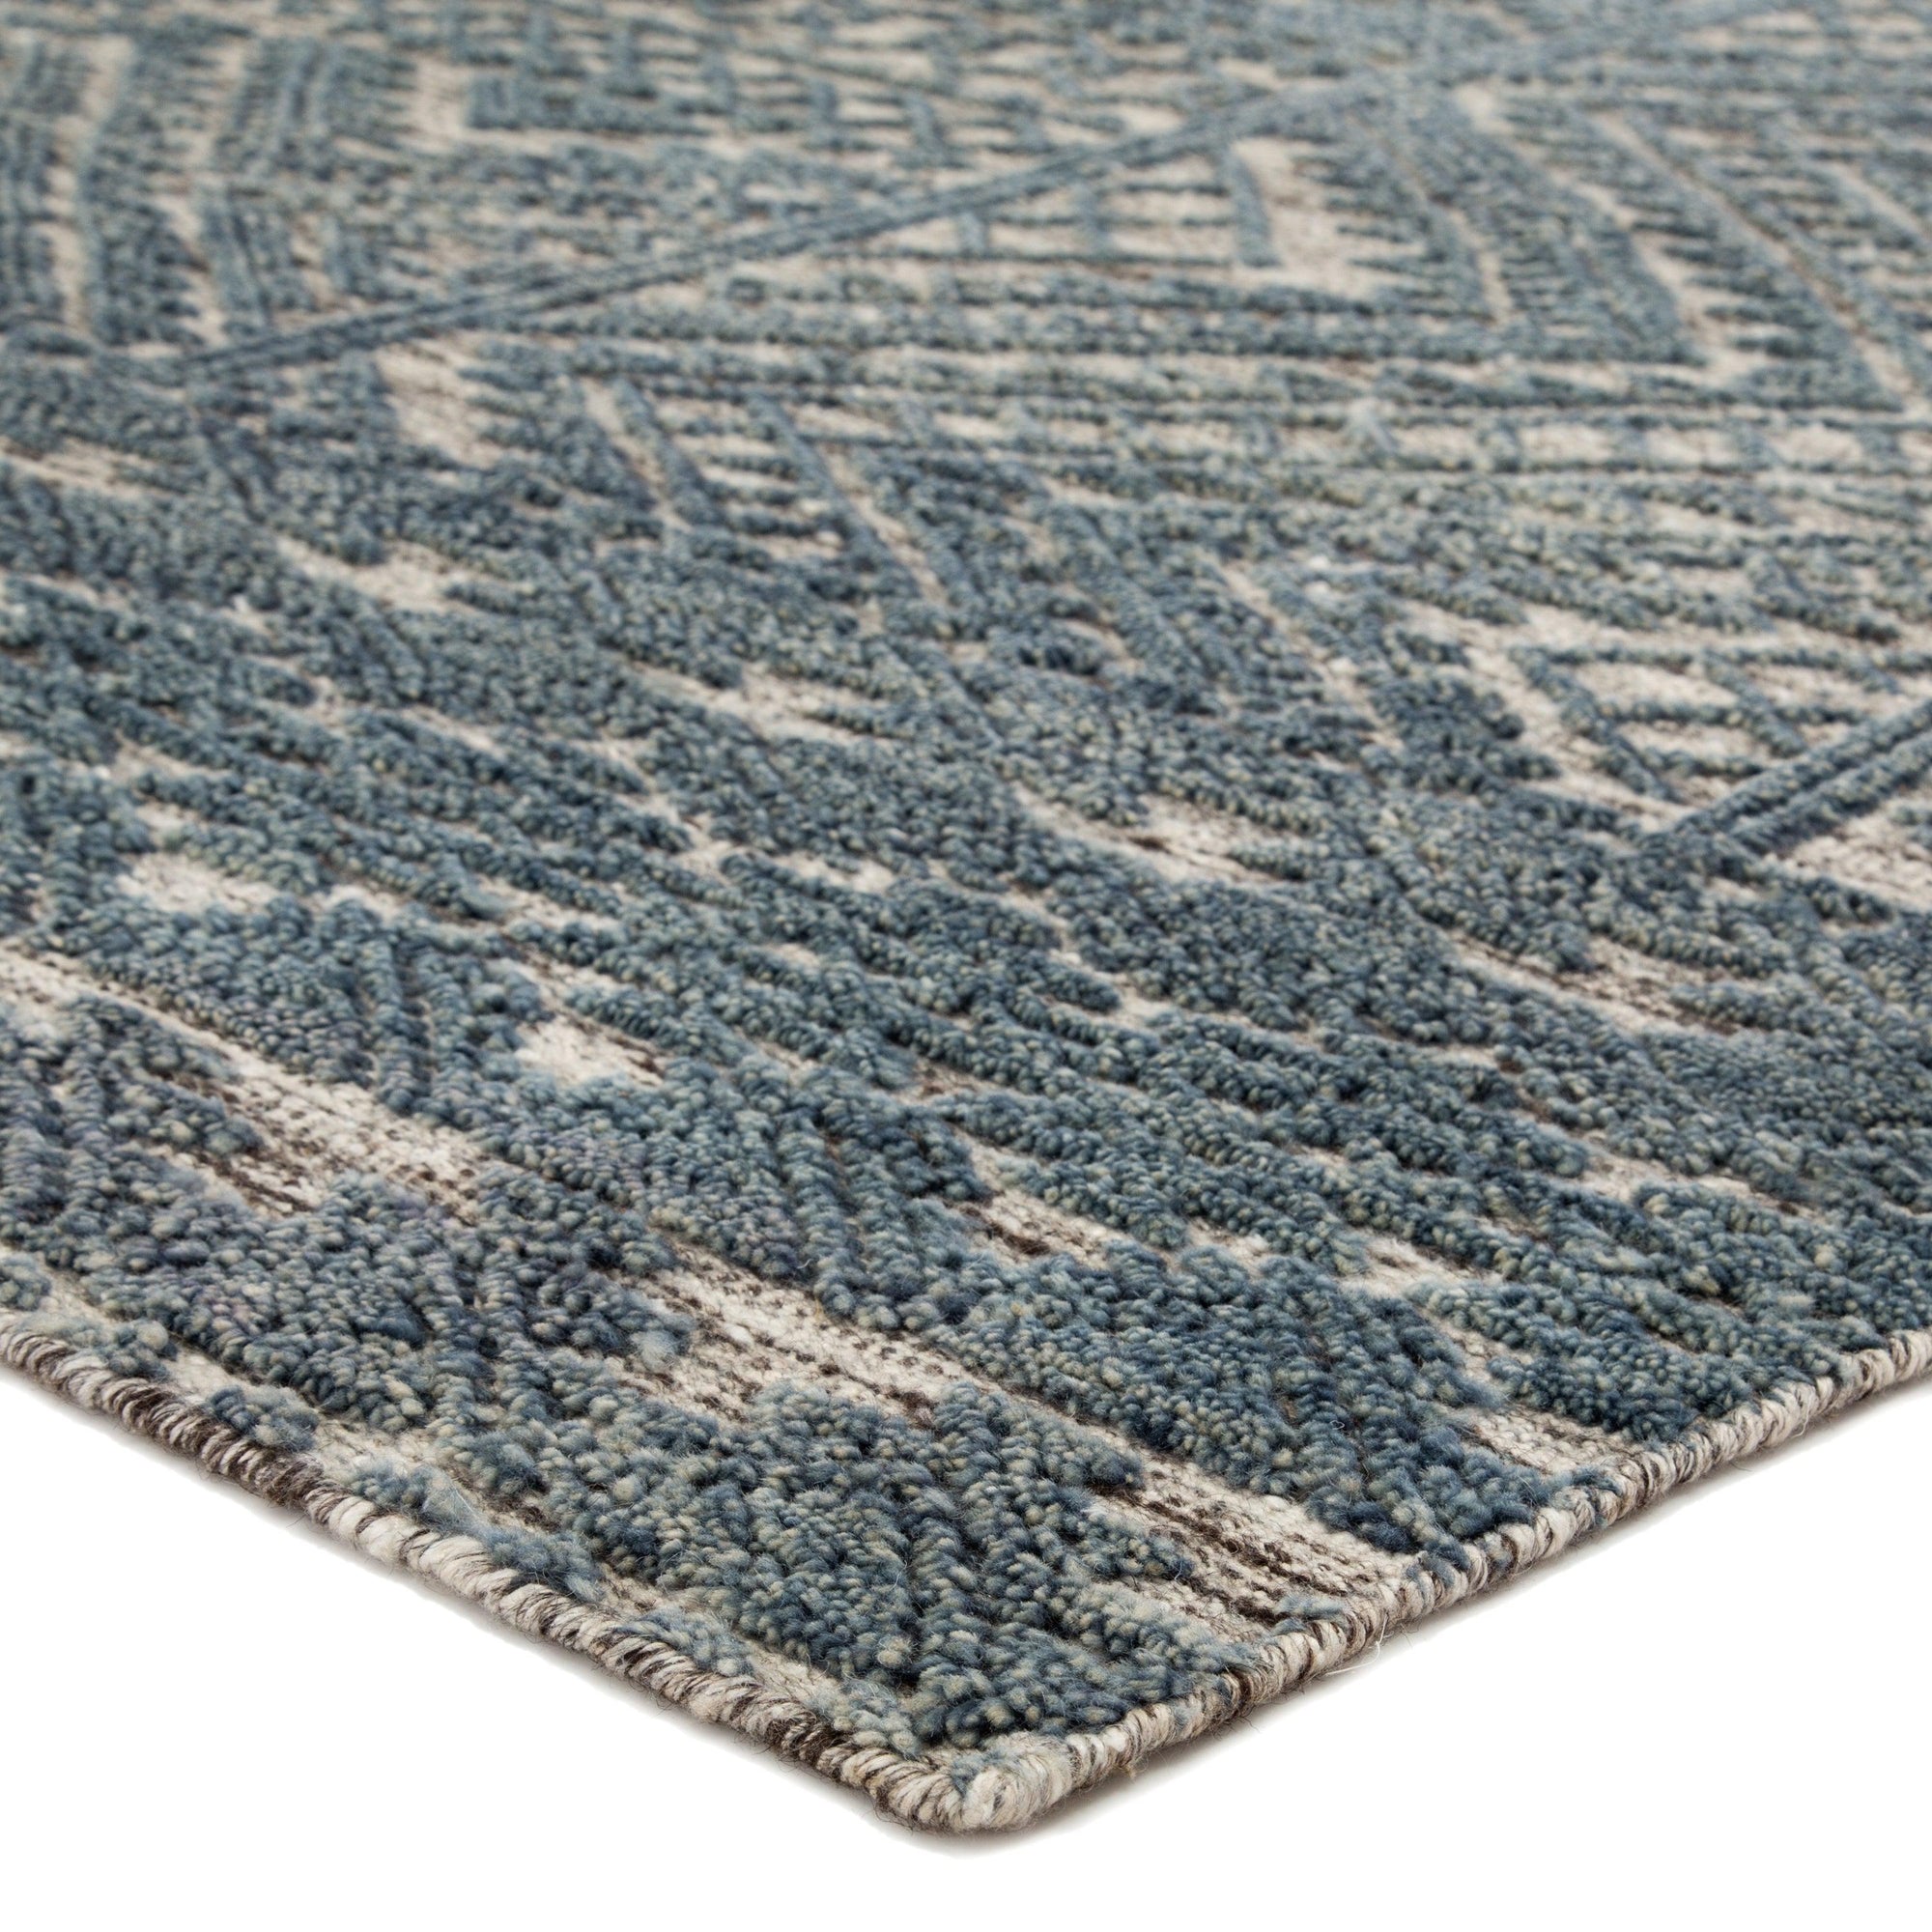 Rugs by Roo | Jaipur Living Prentice Hand-Knotted Geometric Blue Ivory Area Rug-RUG143901